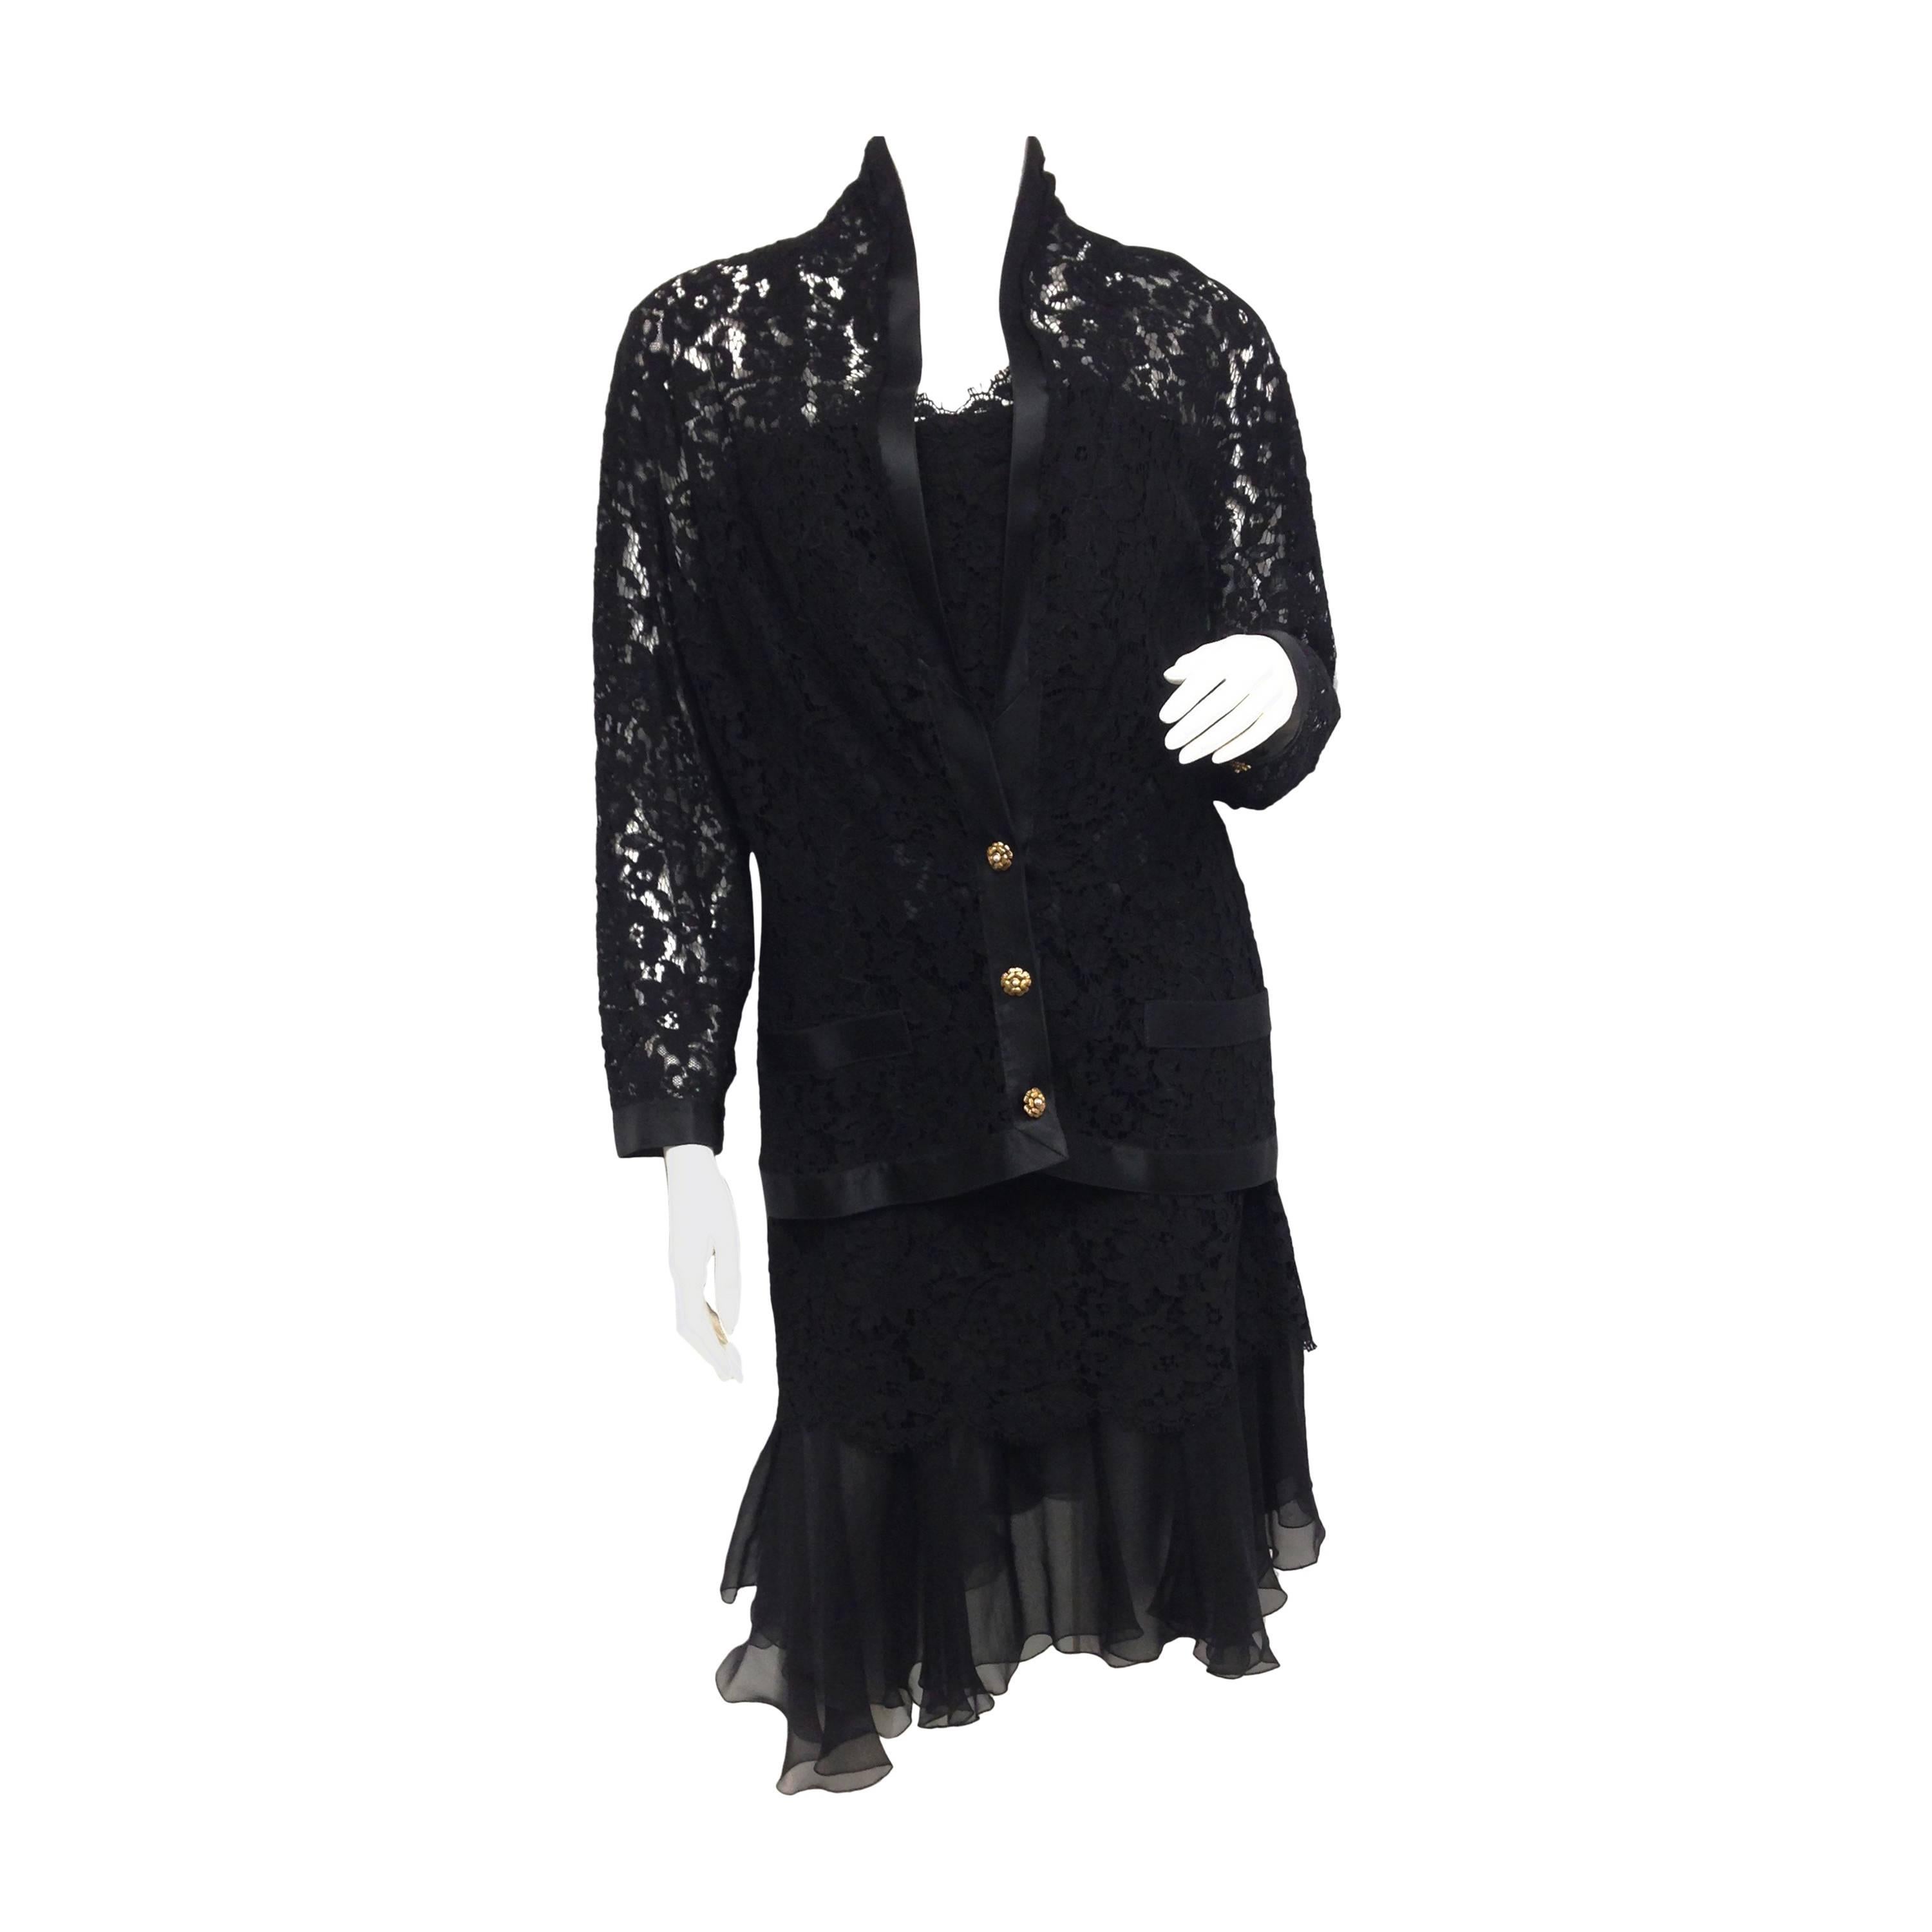 Chanel Black Lace Silk and Chiffon Strapless Hourglass Cocktail Dress Set For Sale